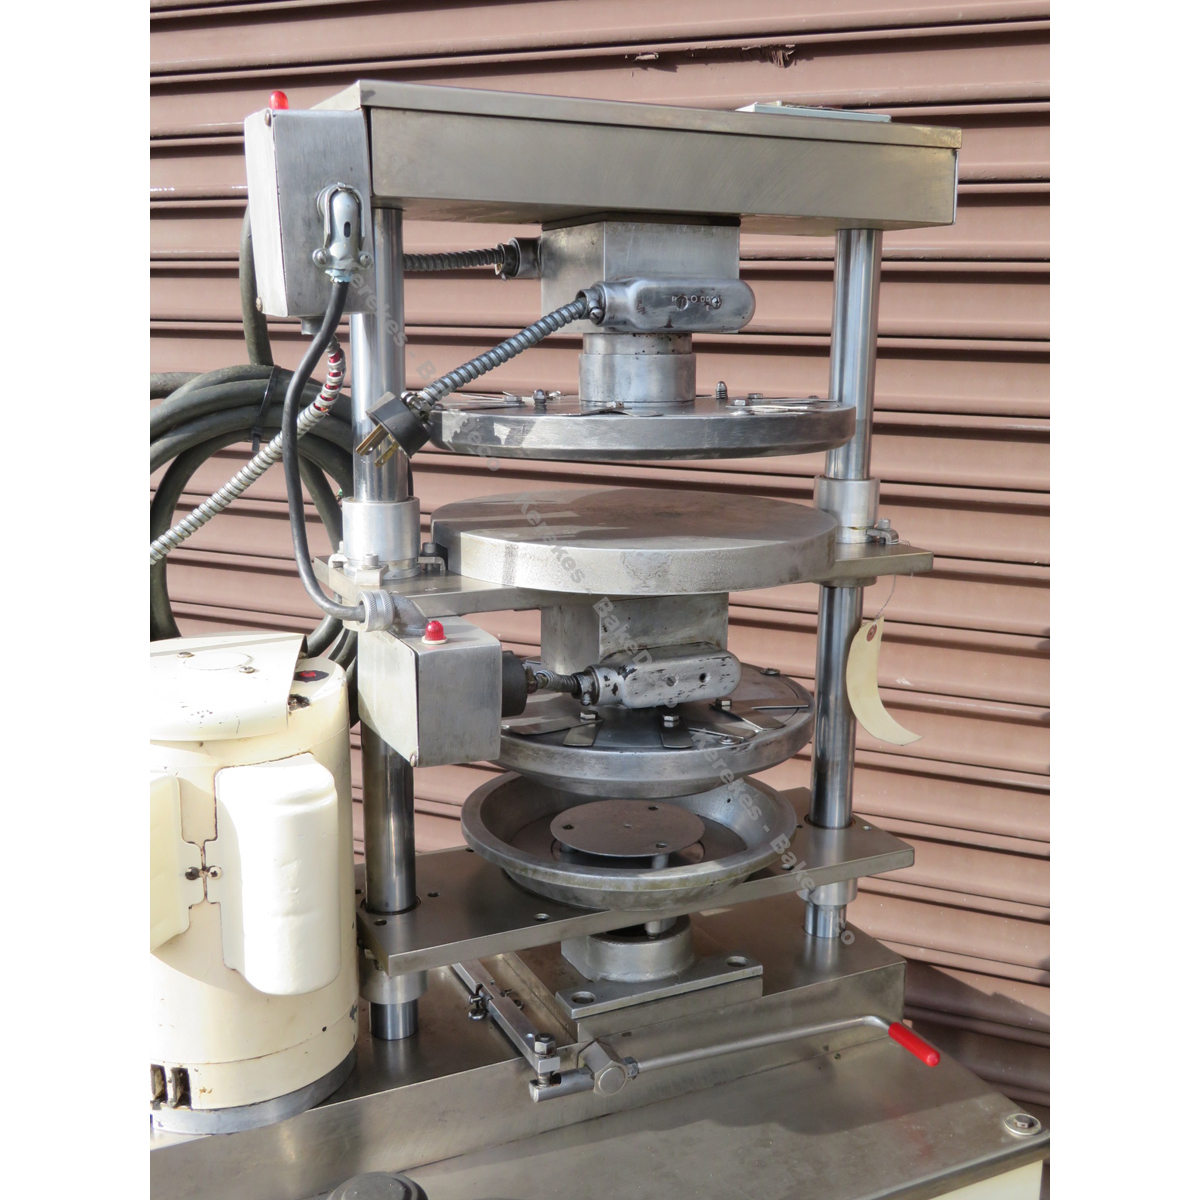 Comtec 2200 Pie and Pastry Crust Forming Press, Used Excellent Condition image 6